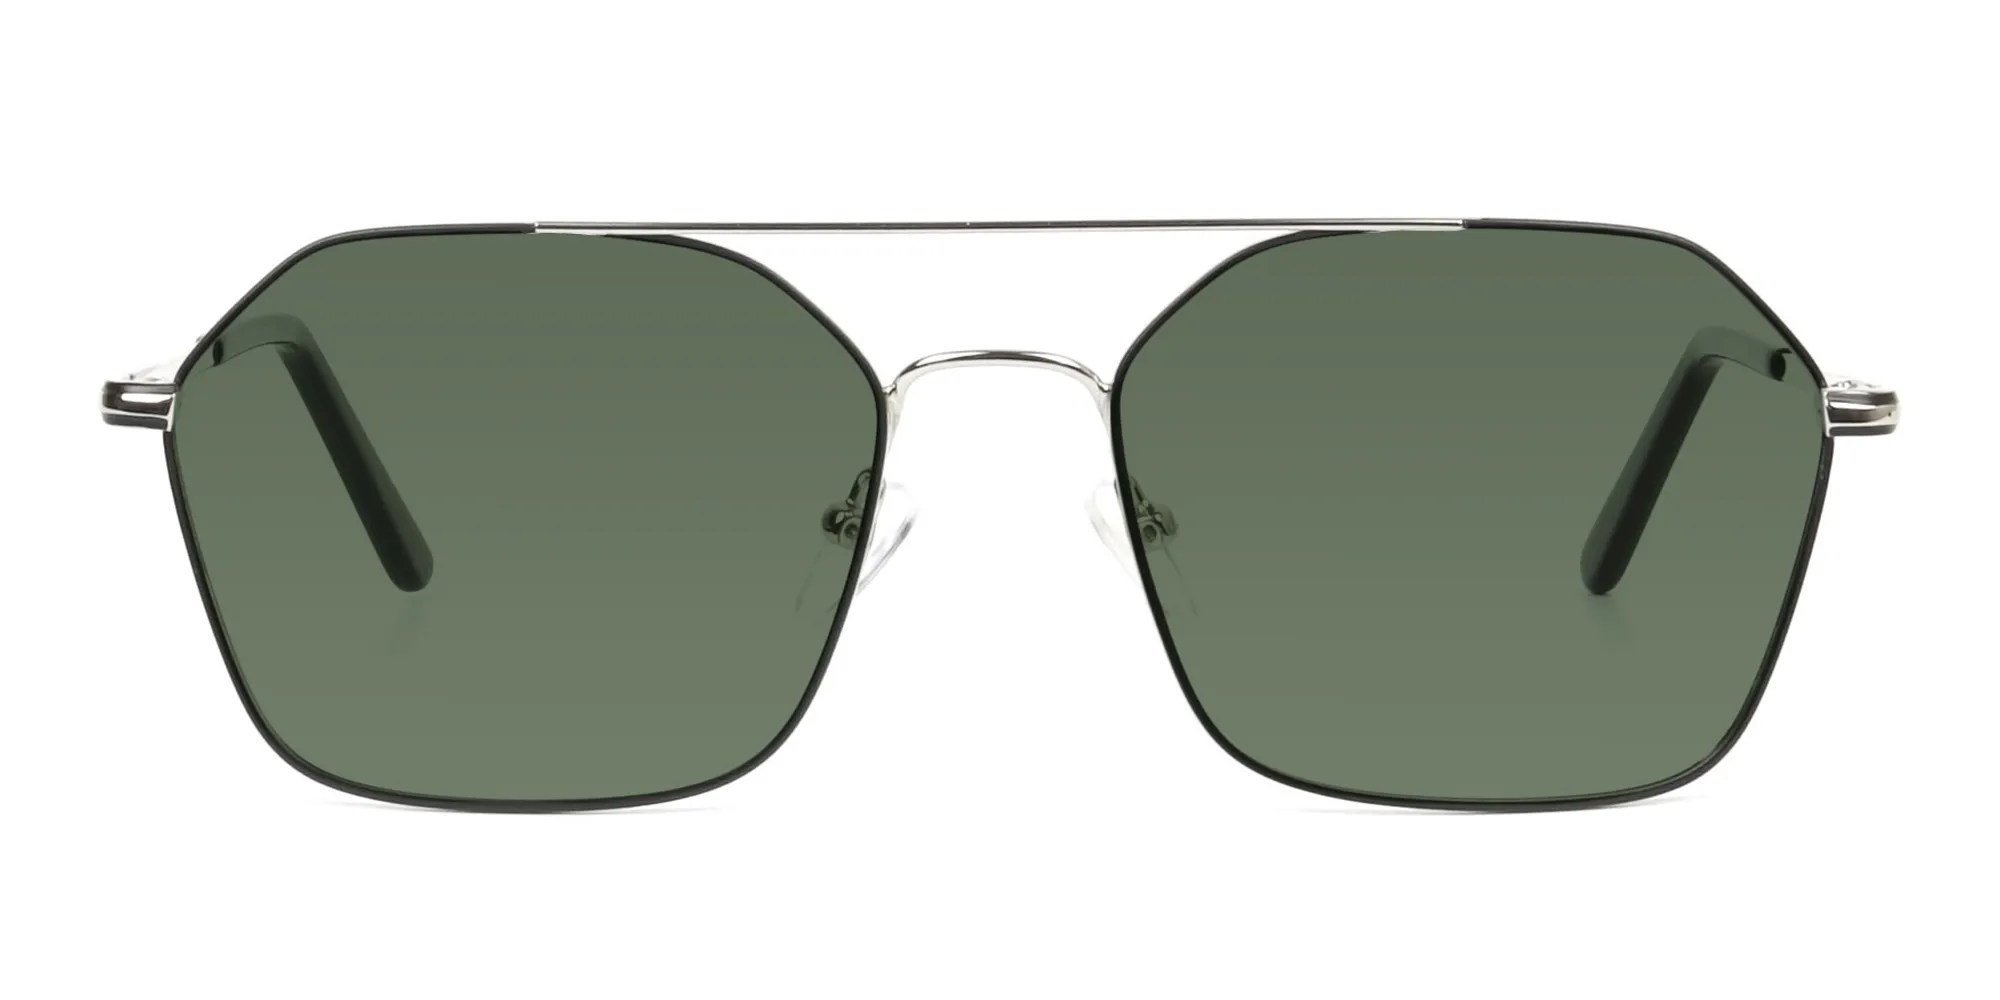 black-and-silver-geomatric-metal-pilot-green-tinted-sunglasses-2